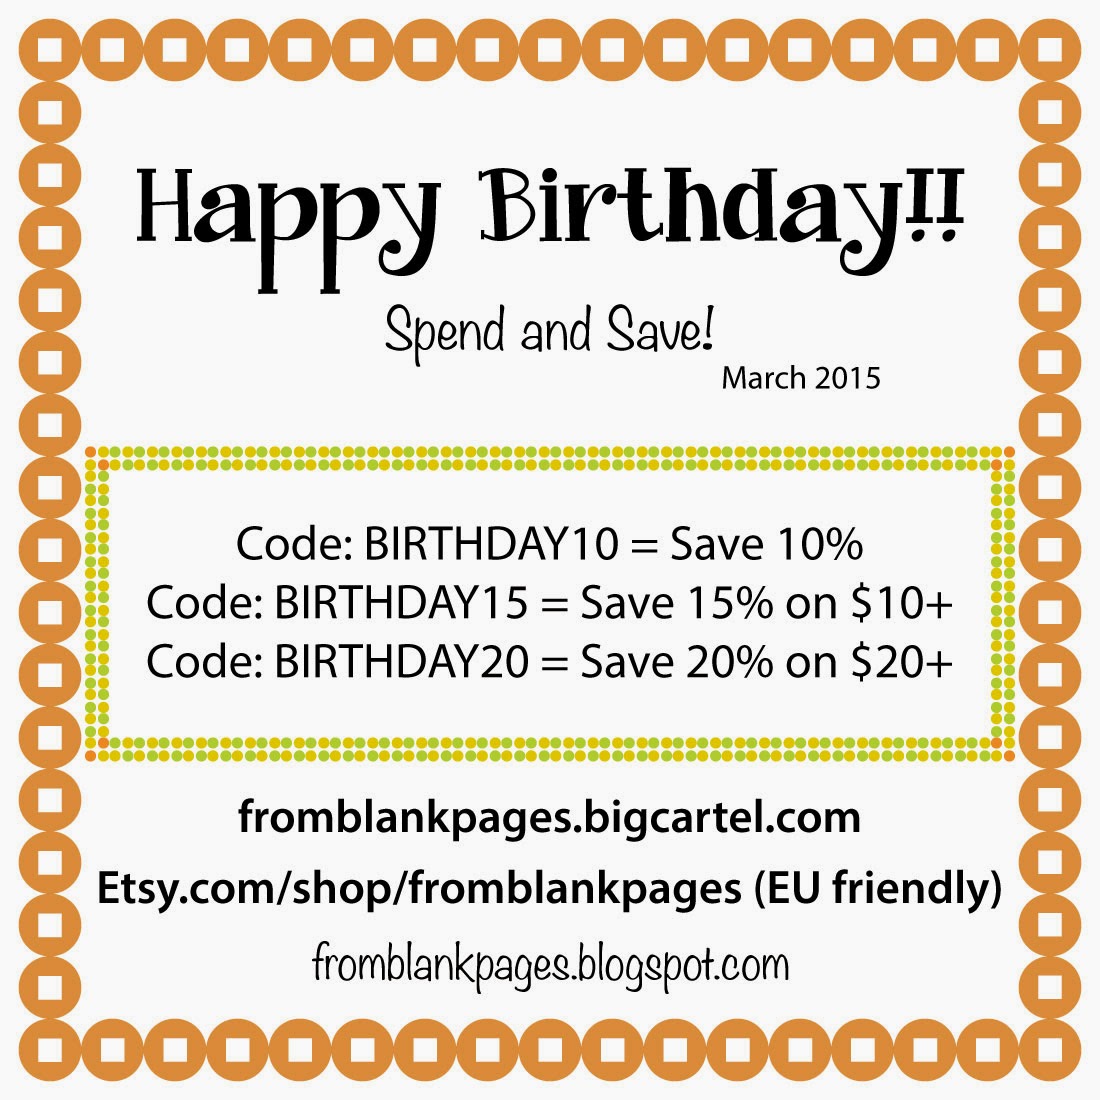 from-blank-pages-happy-birthday-coupons